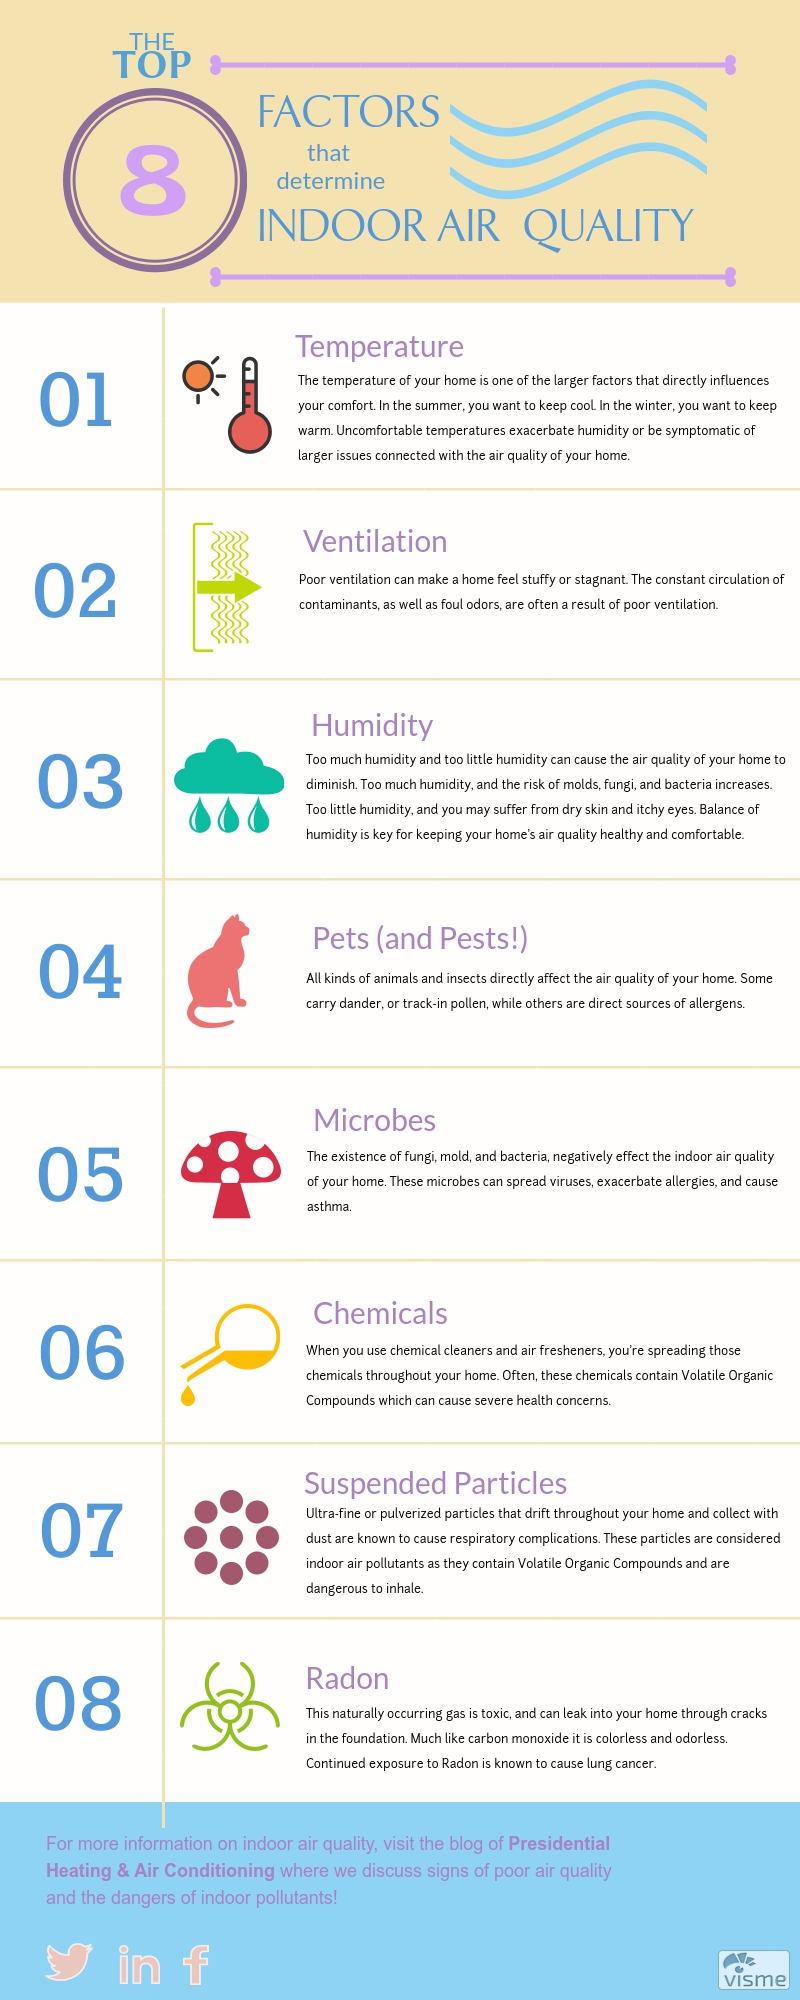 The Top 8 Factors that determine Indoor Air Quality infographic with text below